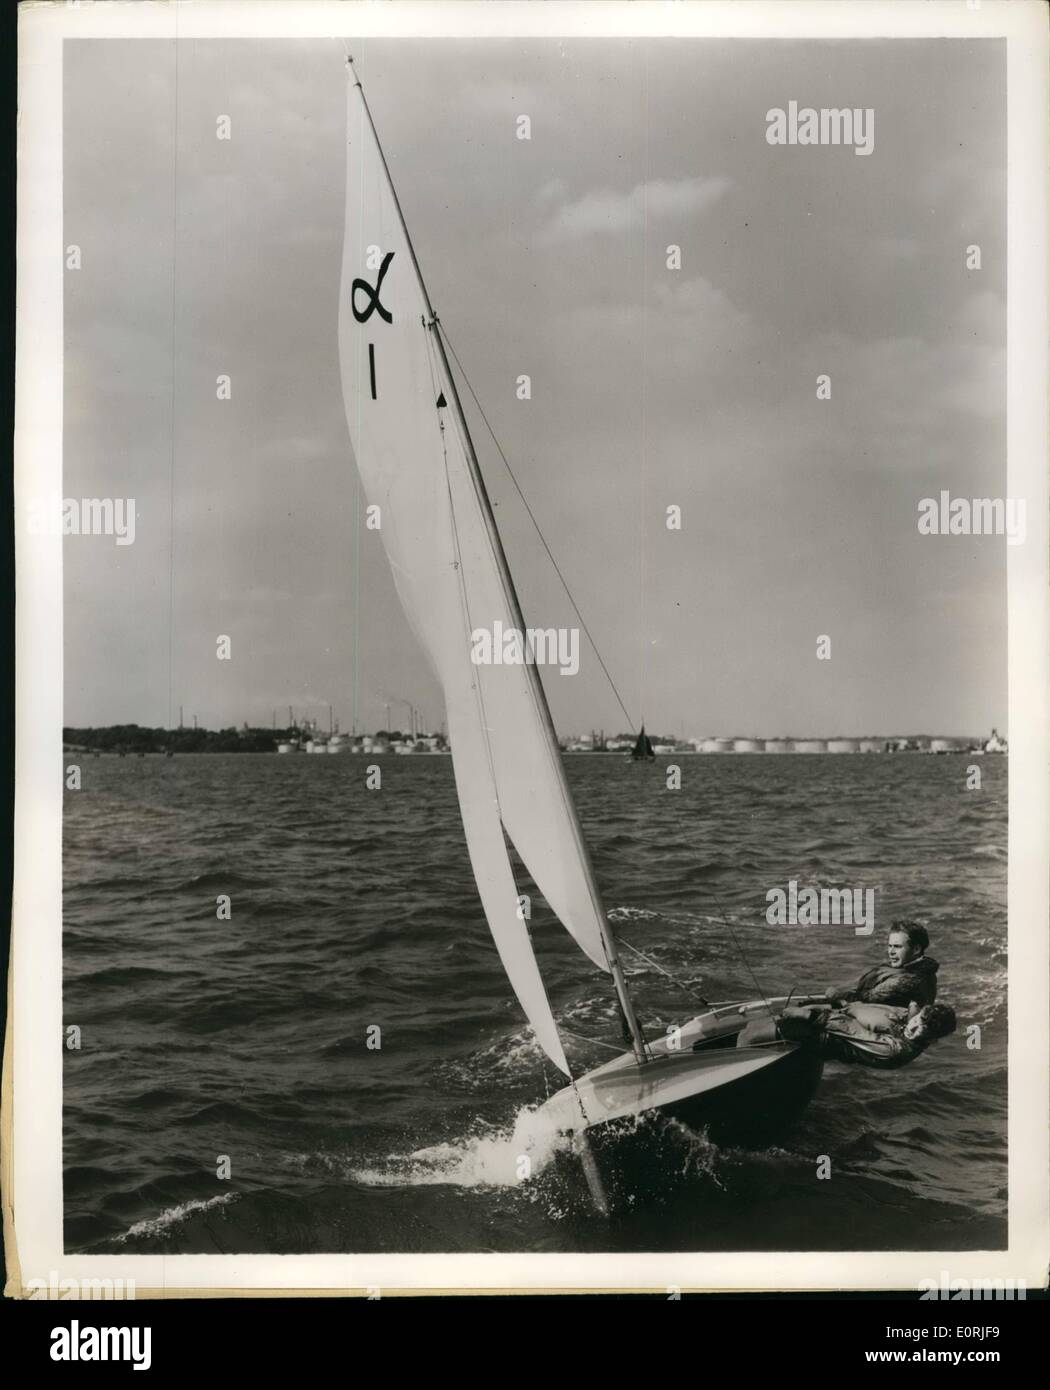 Oct. 10, 1959 - Unsinkable Dinghy; A 12 ft Alpha sailing dinghy, claimed as unsinkable by its manufacturers because of its foam Stock Photo